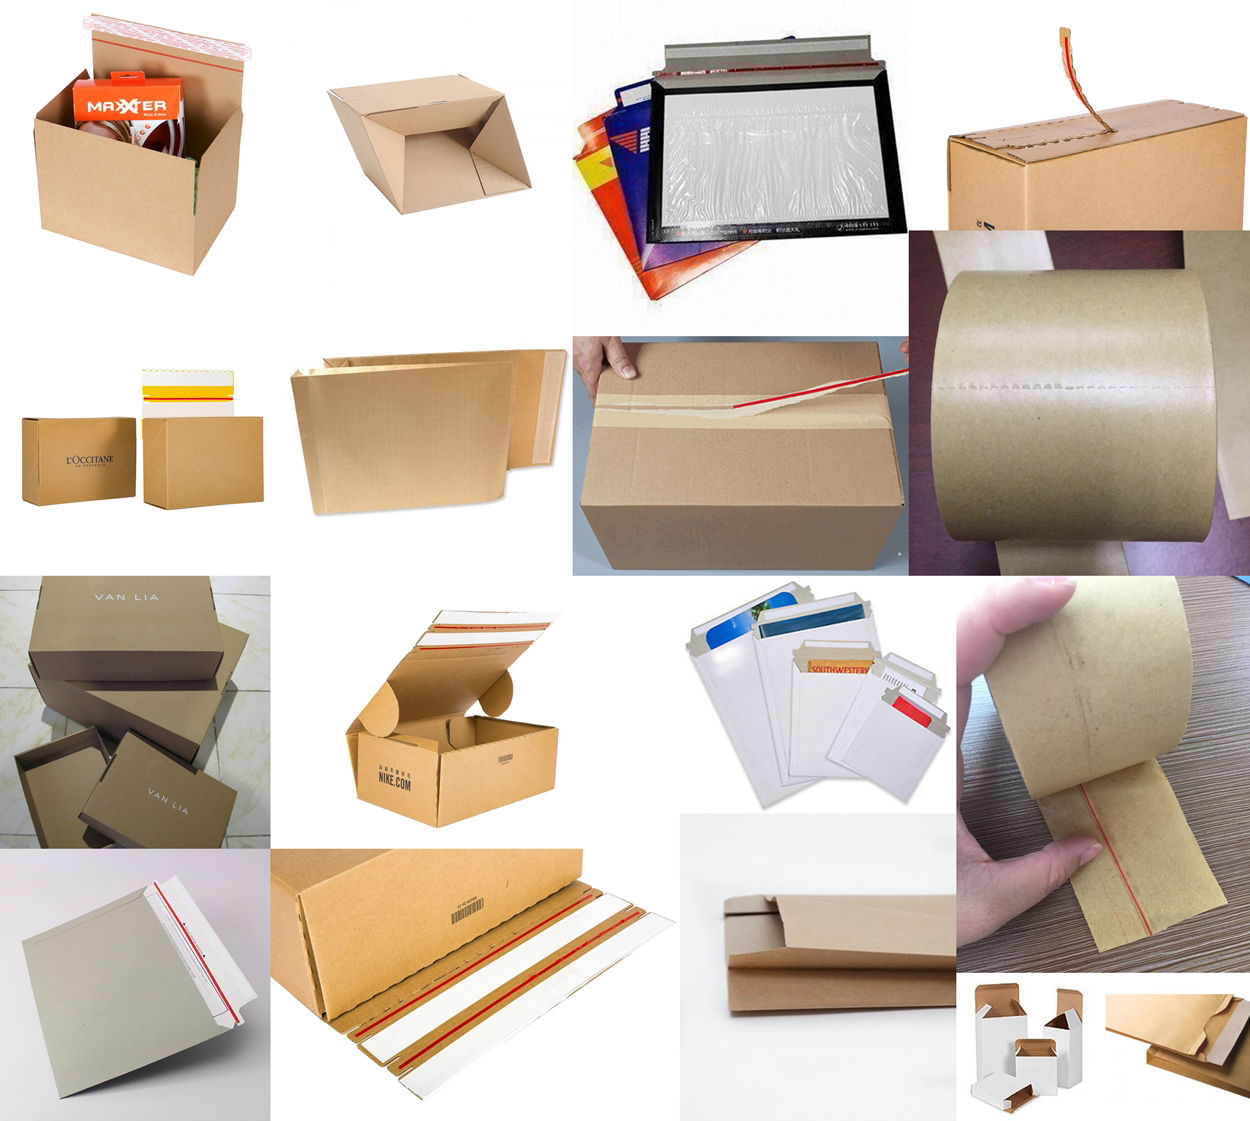 Cees Bags products - bxes and envelopes